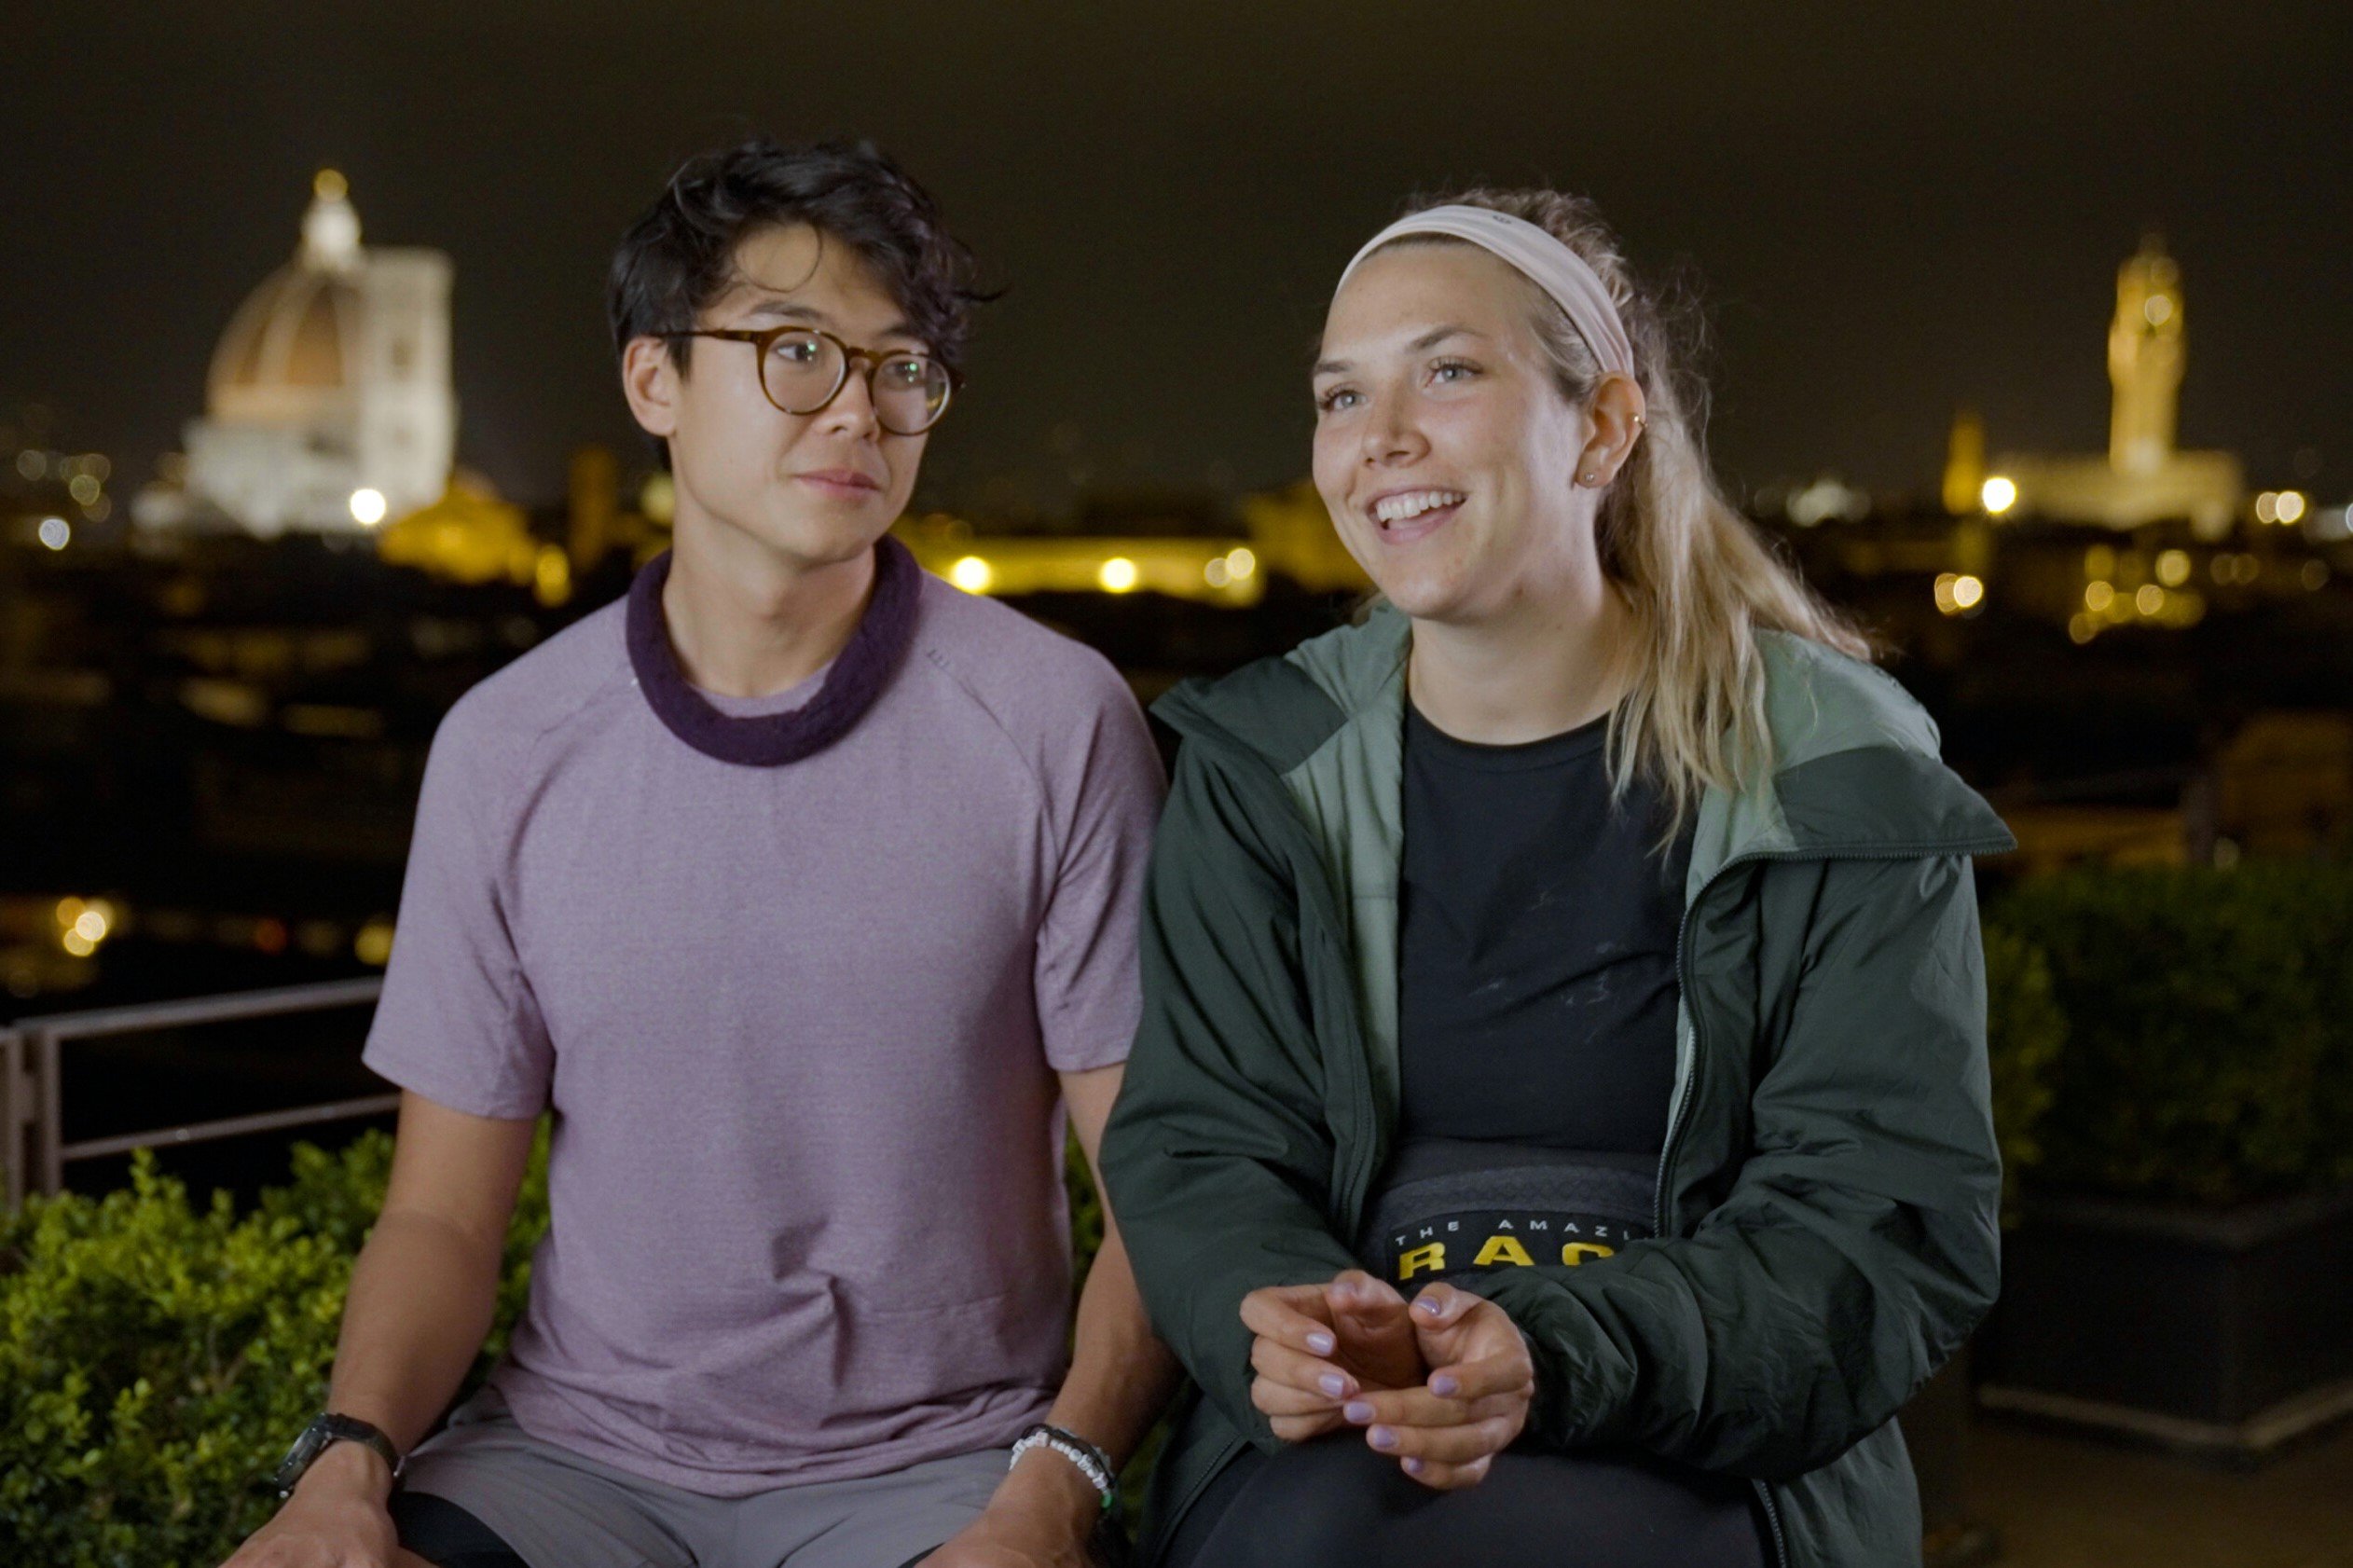 Derek Xiao and Claire Rehfuss, who star in 'The Amazing Race' Season 34 on CBS, record a confessional at night. Derek wears a light purple shirt and light gray pants. Claire wears a dark green jacket over a black shirt and black leggings.